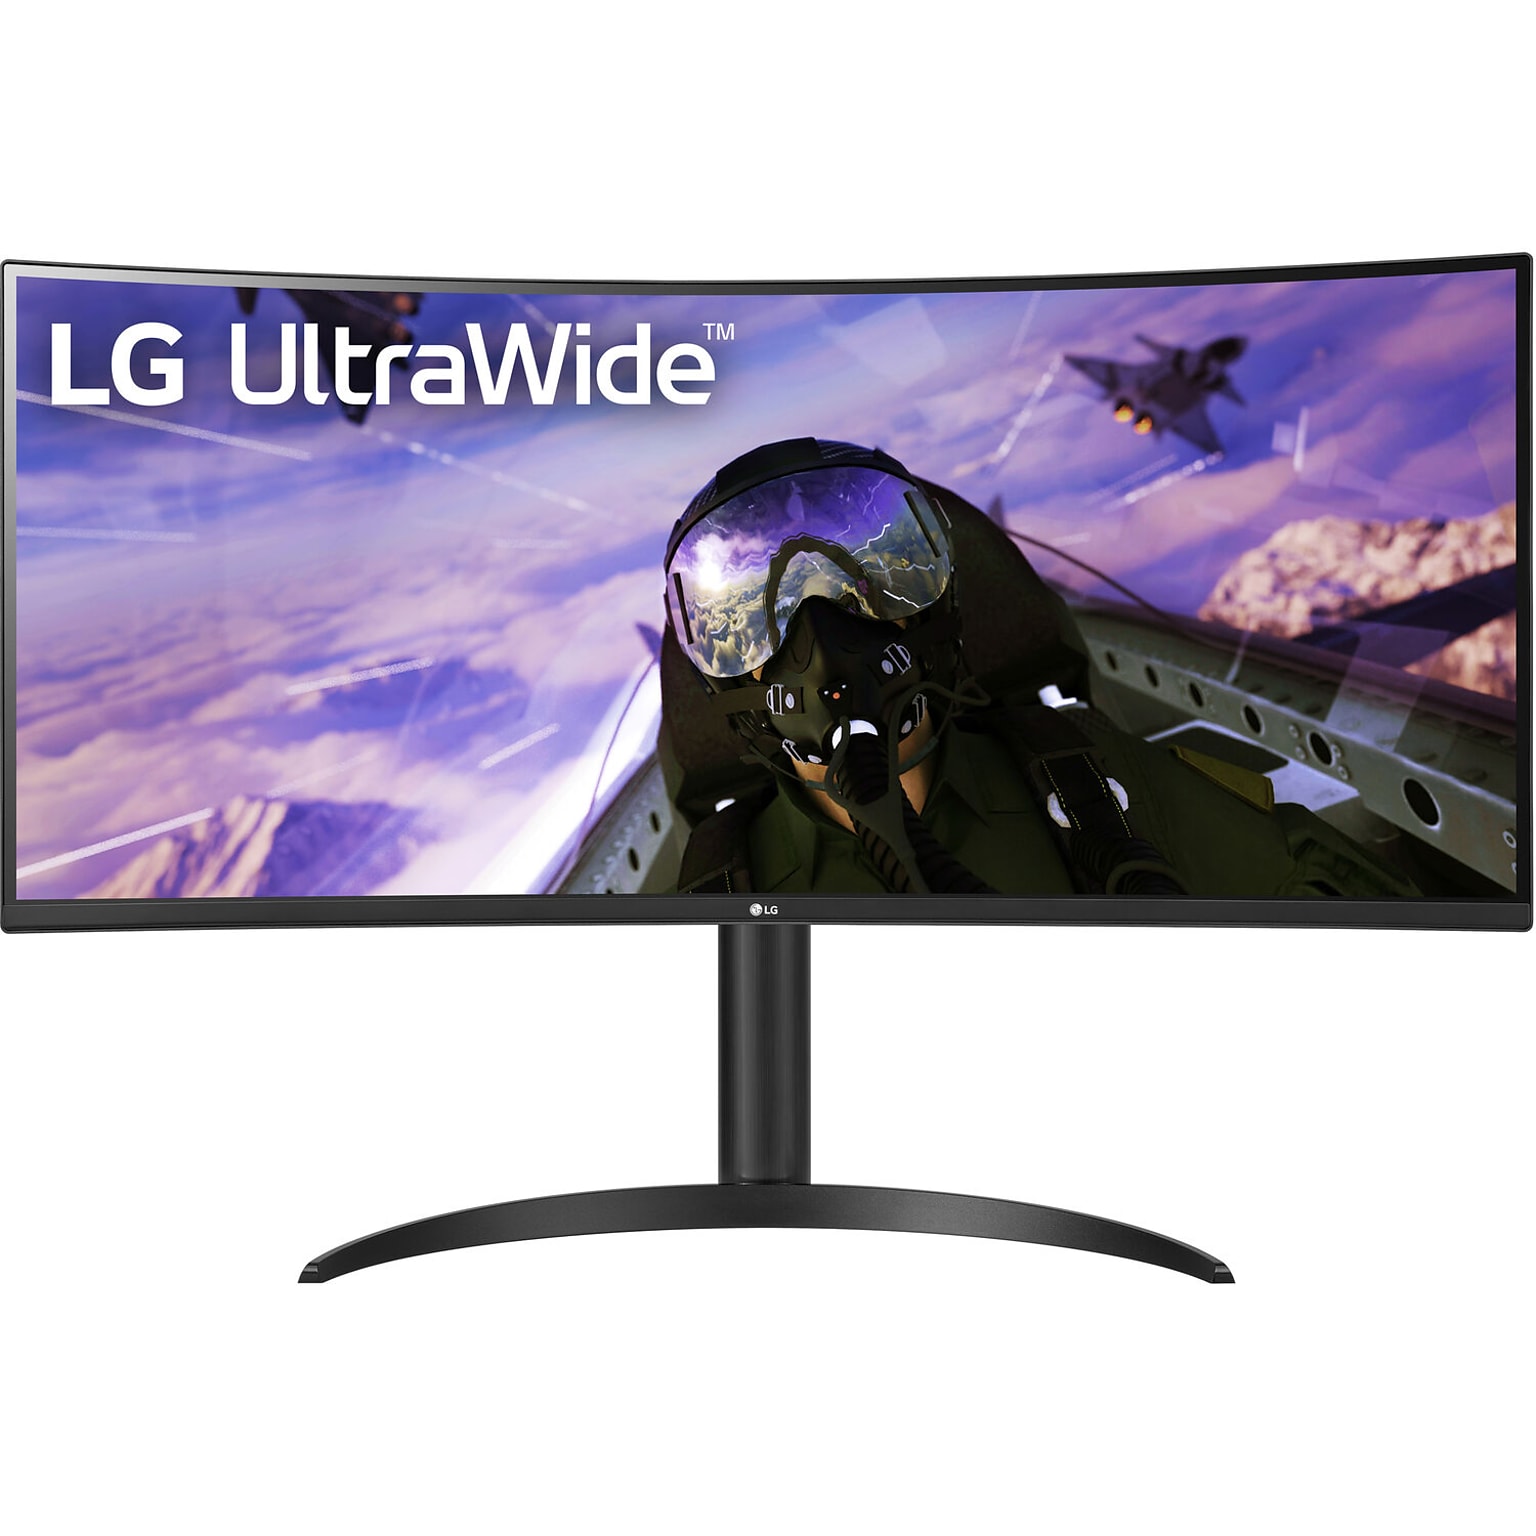 LG Ultrawide 34 Curved 165 Hz LCD Gaming Monitor, Black (34WP65CB)